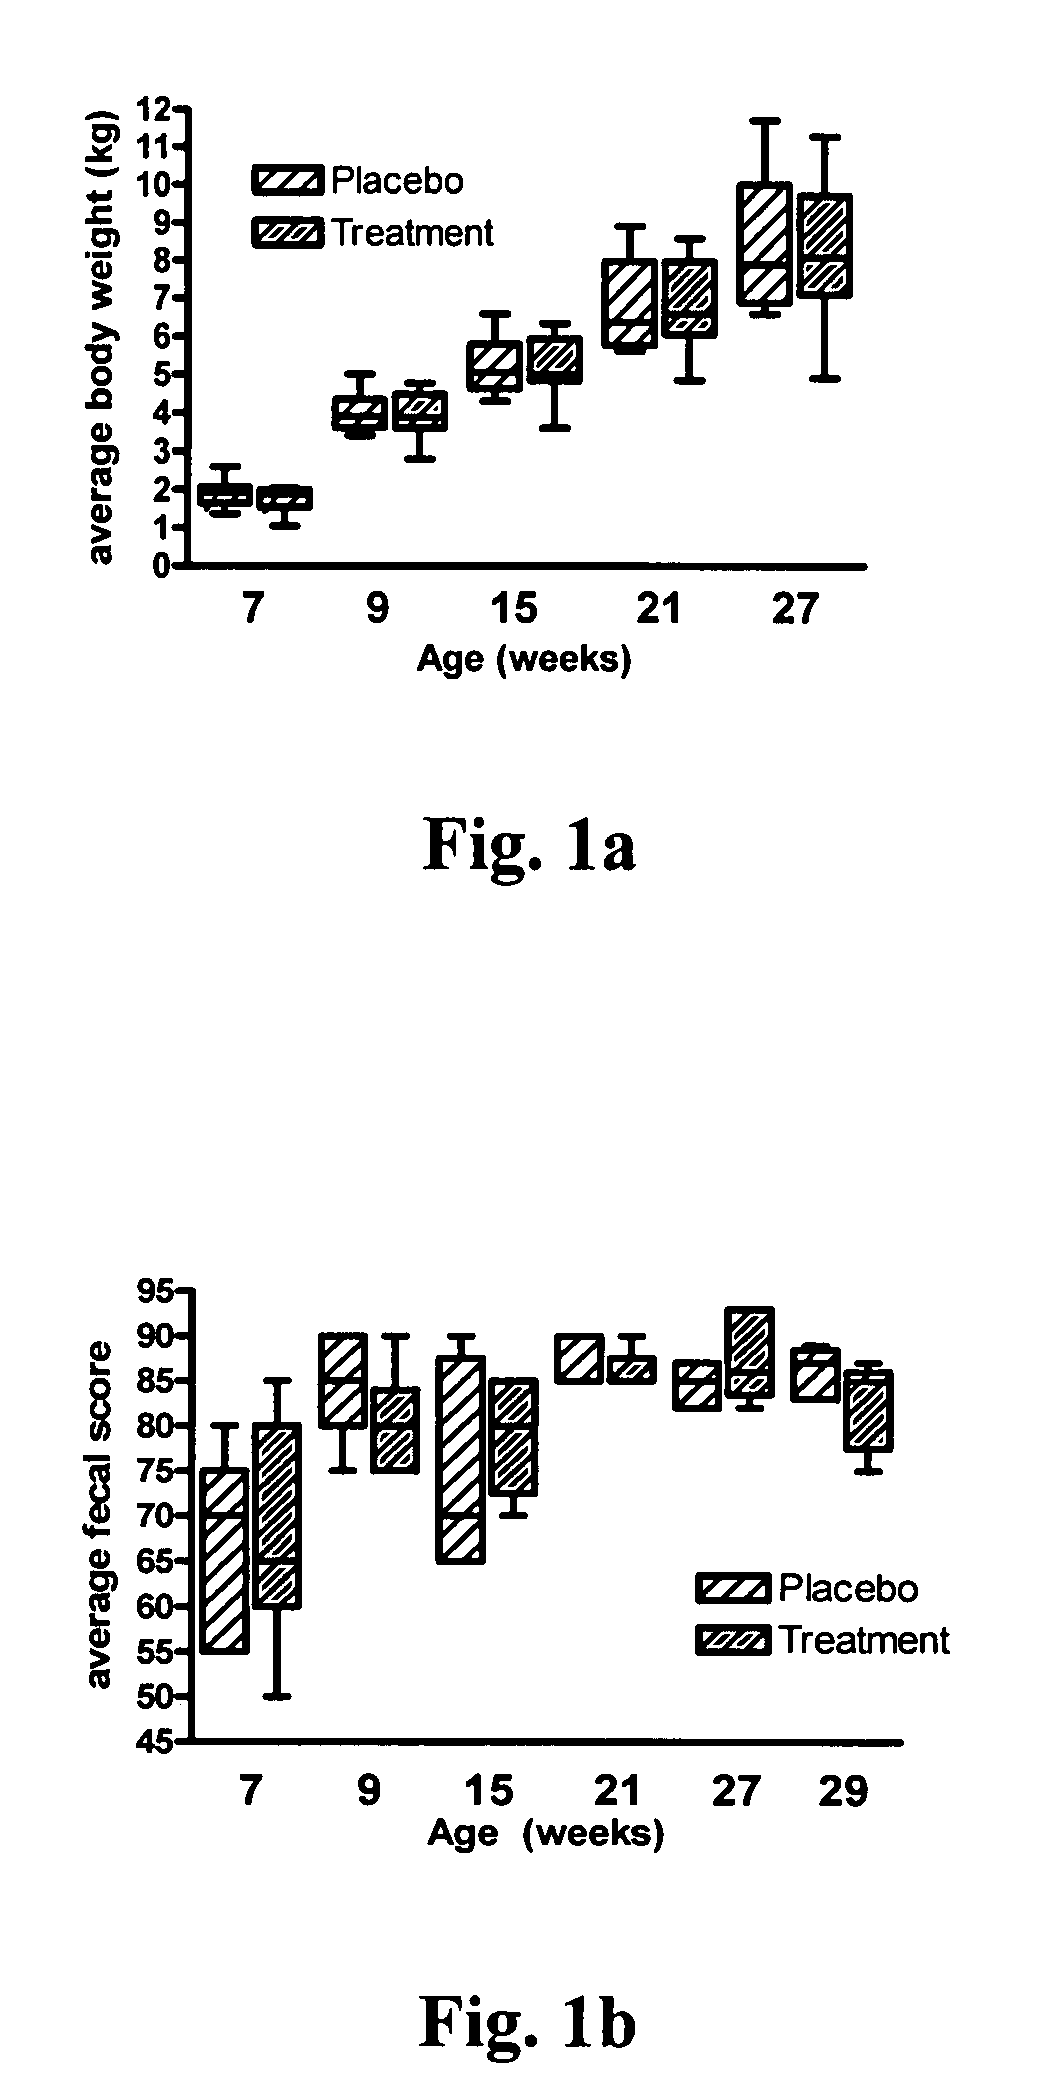 Compositions and methods useful for modulating immunity, enhancing vaccine efficacy, decreasing morbidity associated with chronic FHV-1 infections, and preventing or treating conjunctivitis